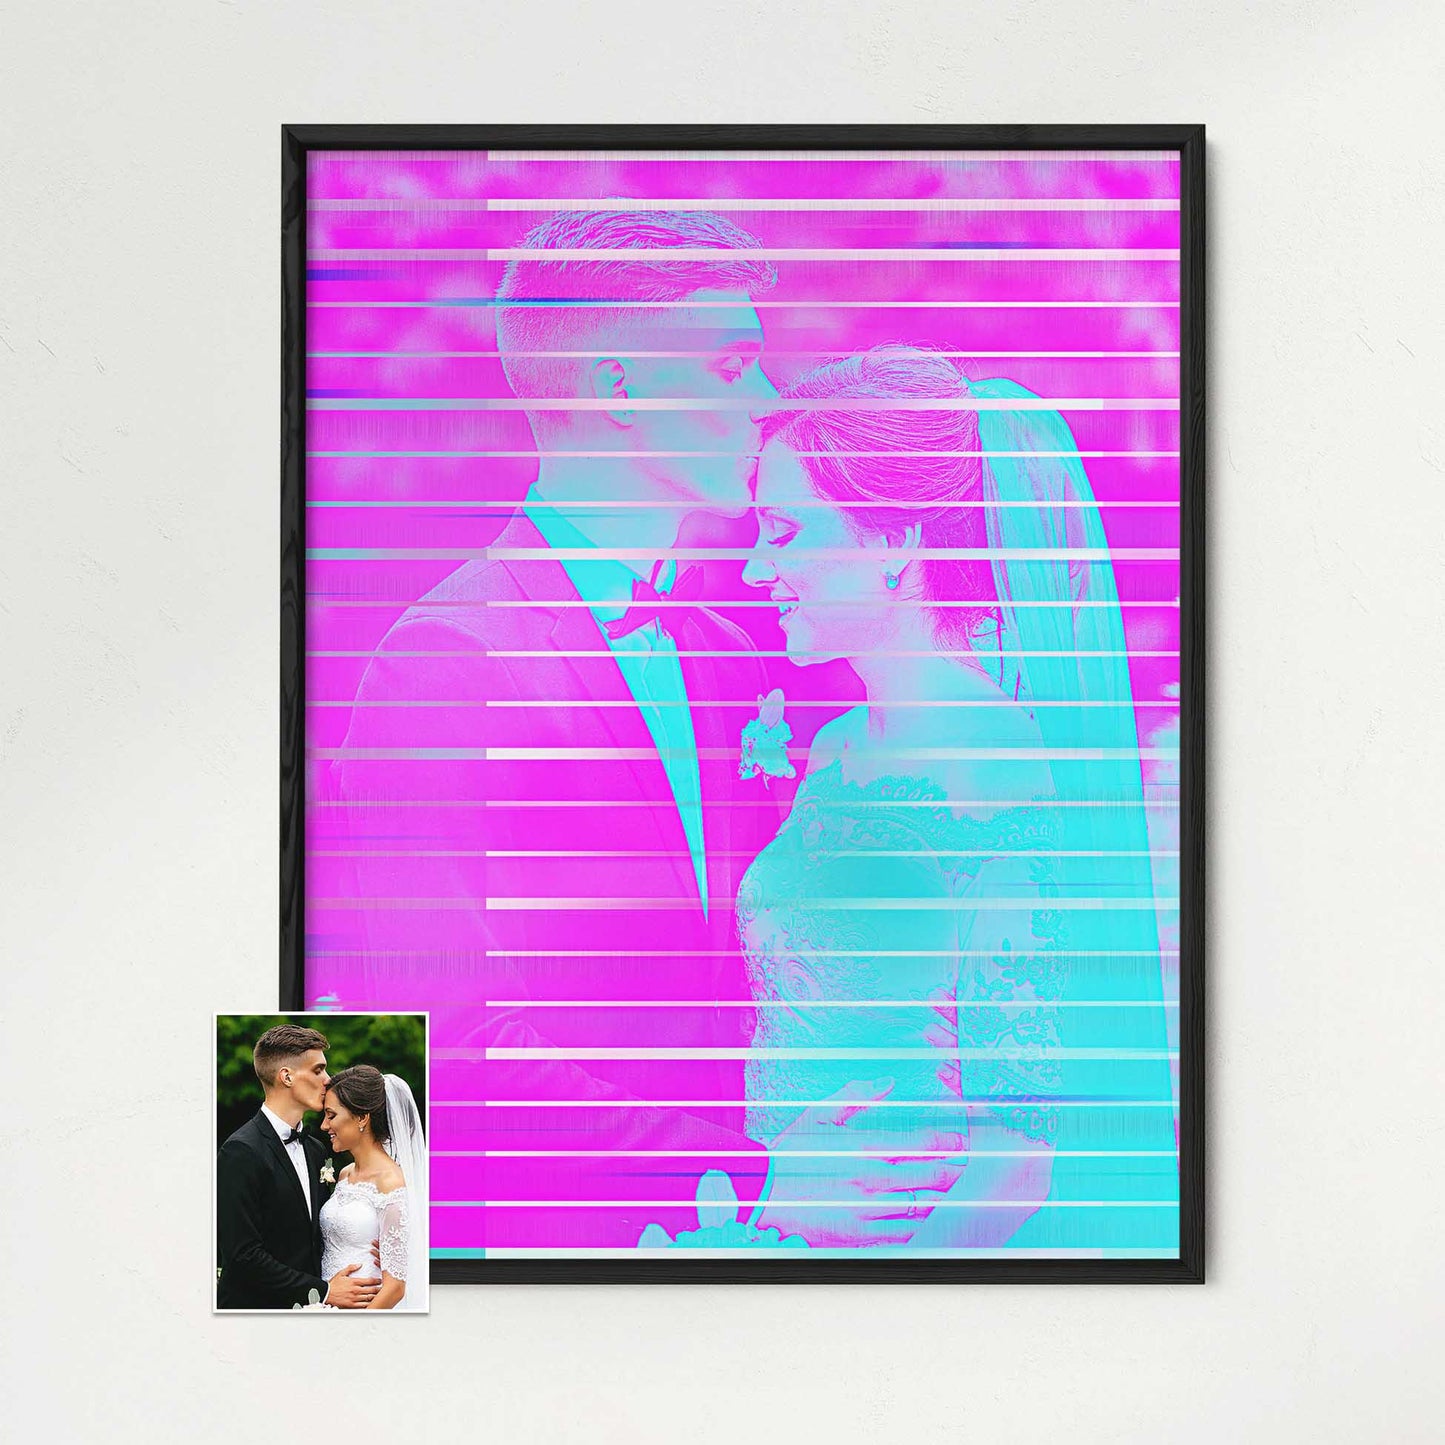 Capture the essence of energy and excitement with our Personalised Purple & Blue Framed Print. The vibrant colors and creative design make it a unique and beautiful addition to your wall art collection. Printed on gallery-quality paper